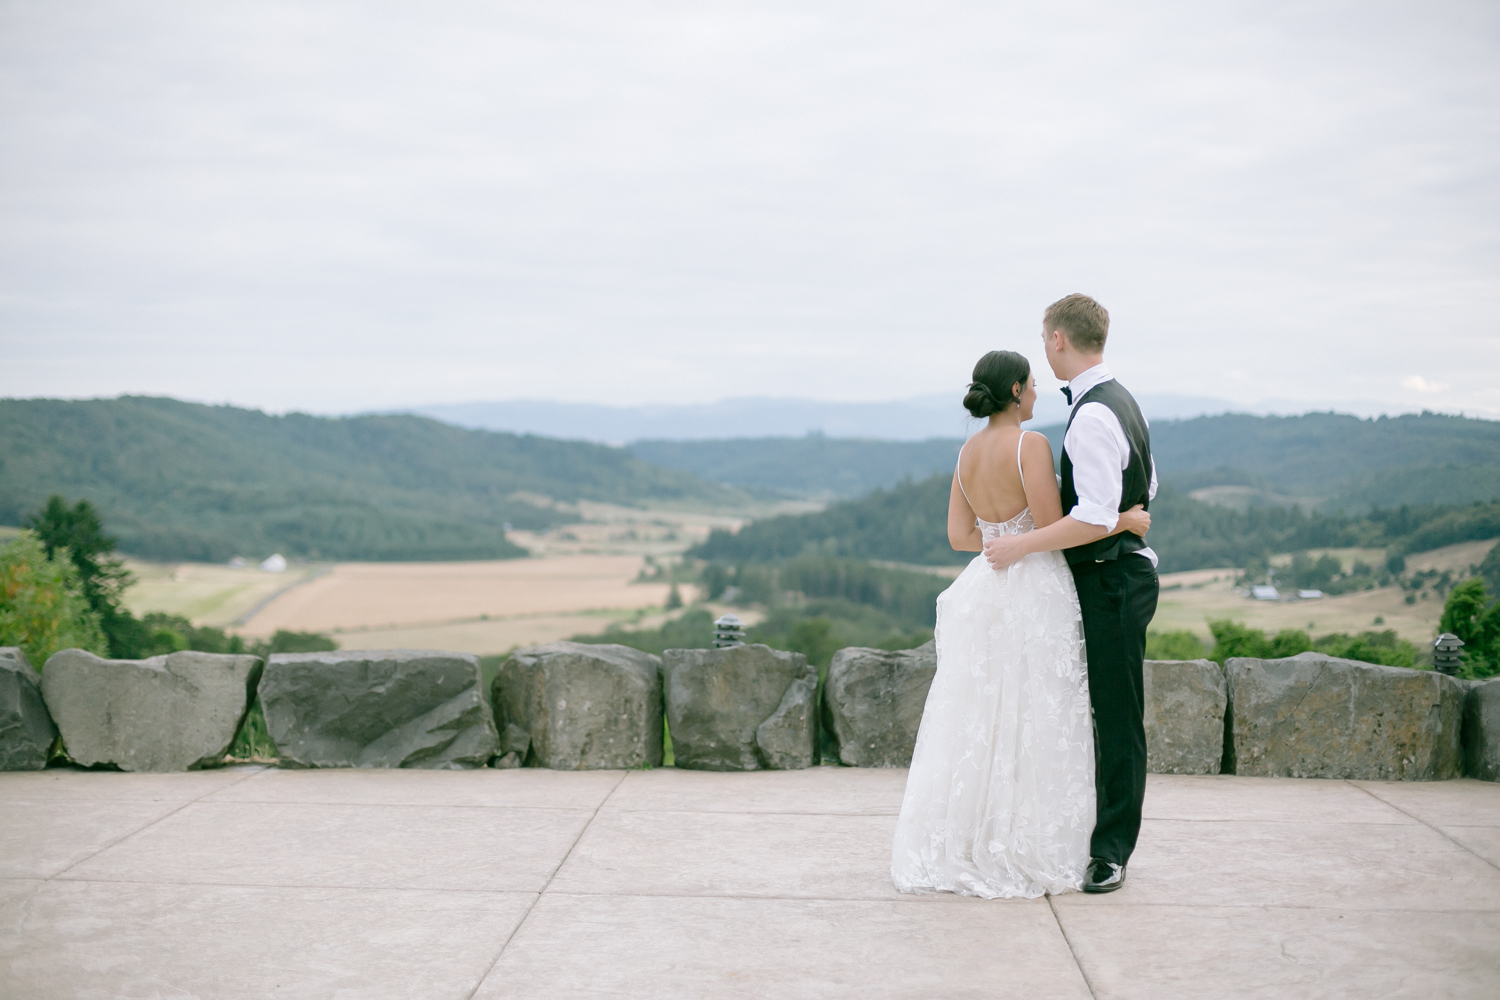 Youngberg Hill Vineyard Wedding in Wine Country Oregon - Corrie Mick Photography-445.jpg